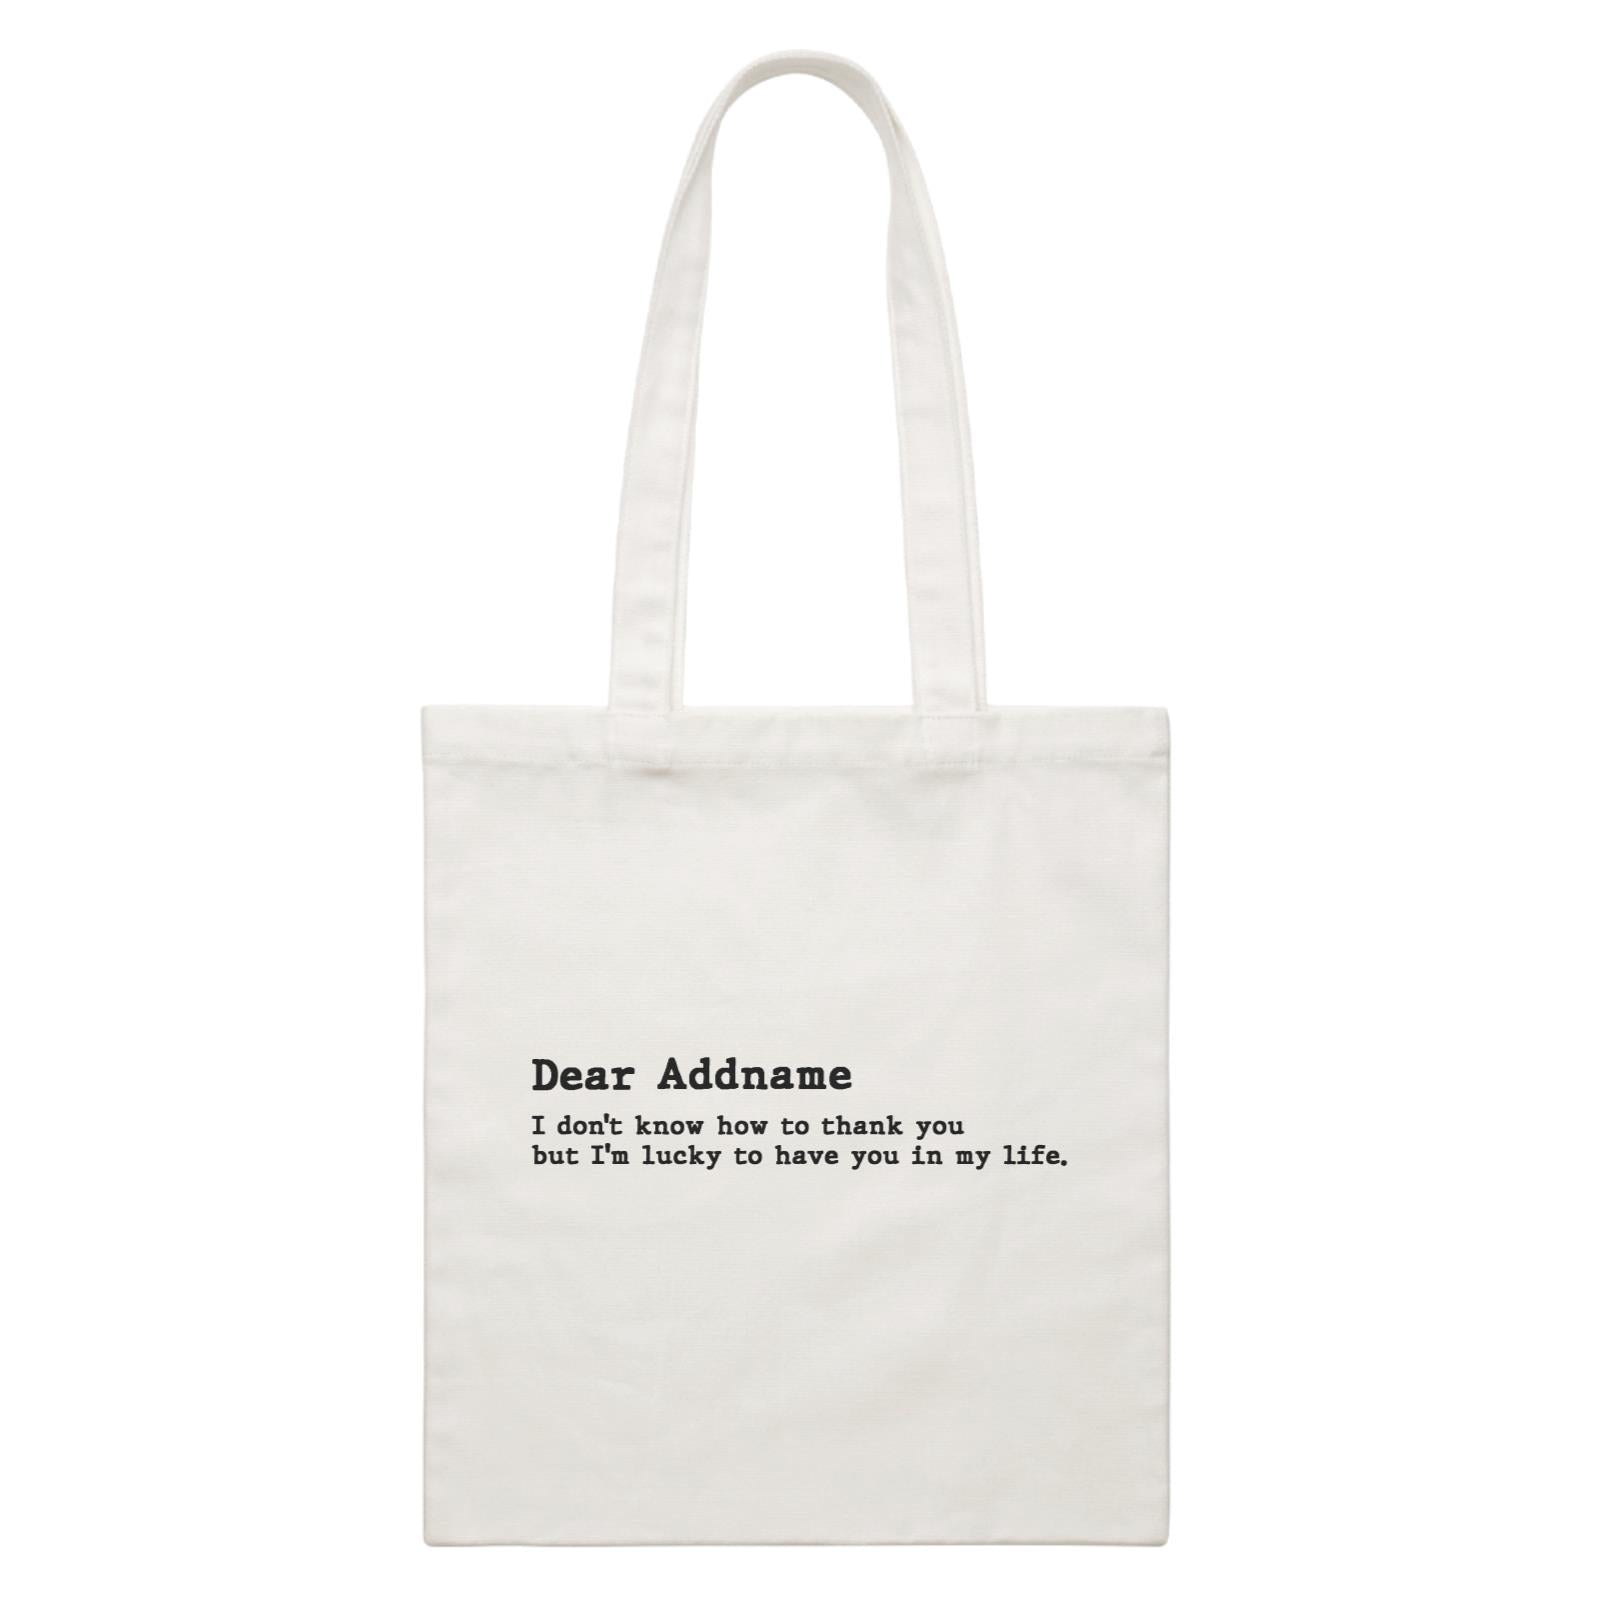 Best Friends Quotes Dear Addname I Don't Know How To Thank You White Canvas Bag